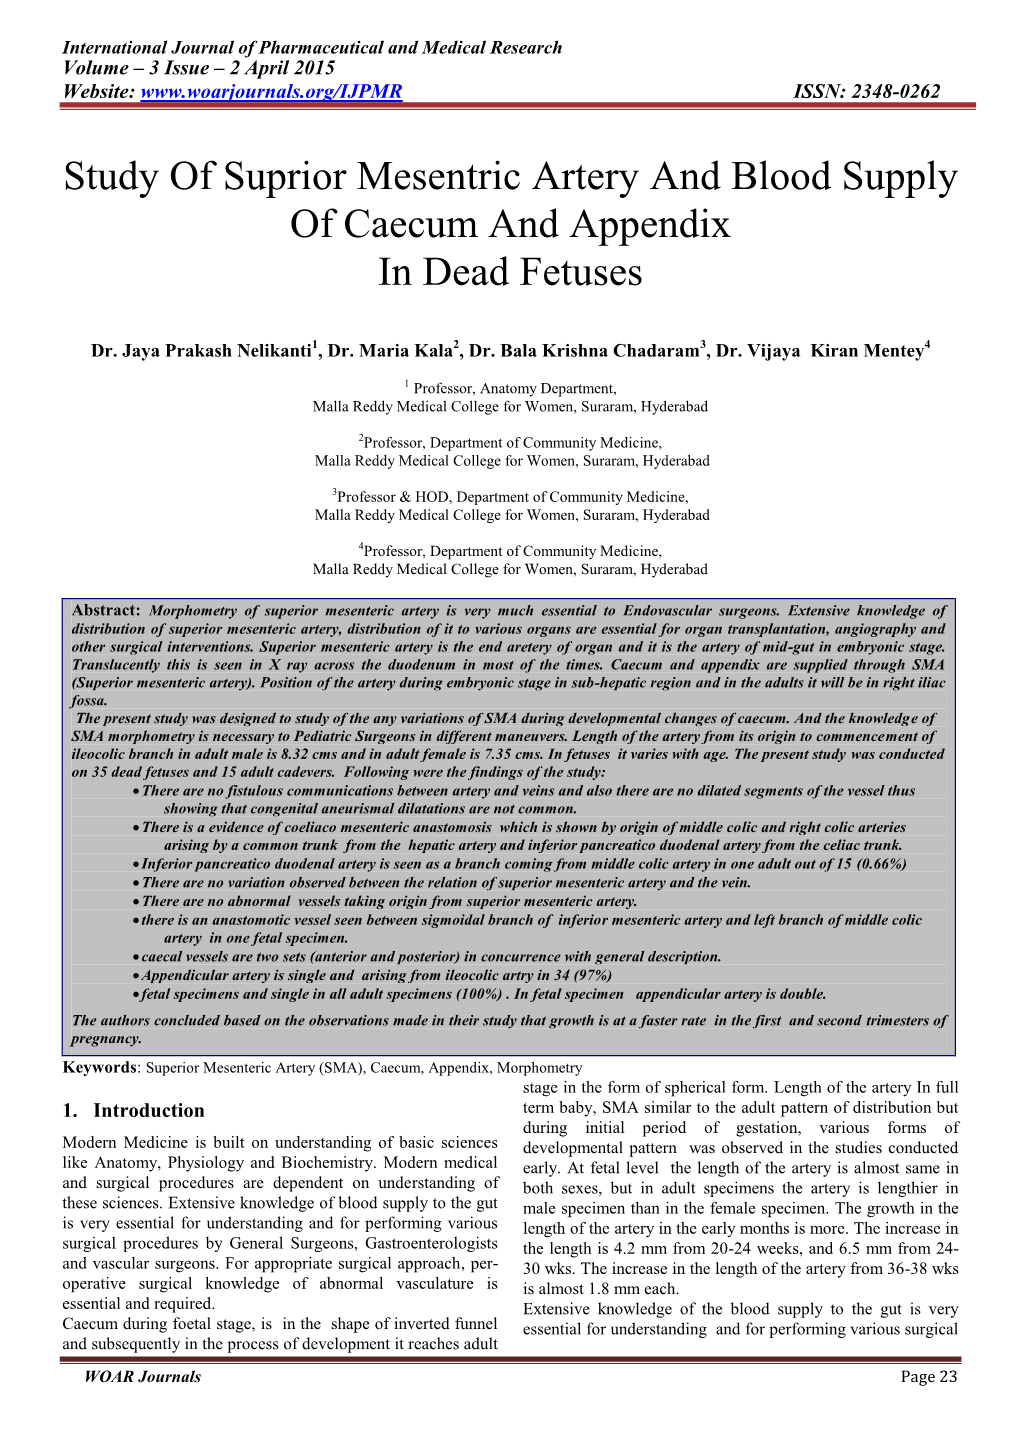 Study of Suprior Mesentric Artery and Blood Supply of Caecum and Appendix in Dead Fetuses